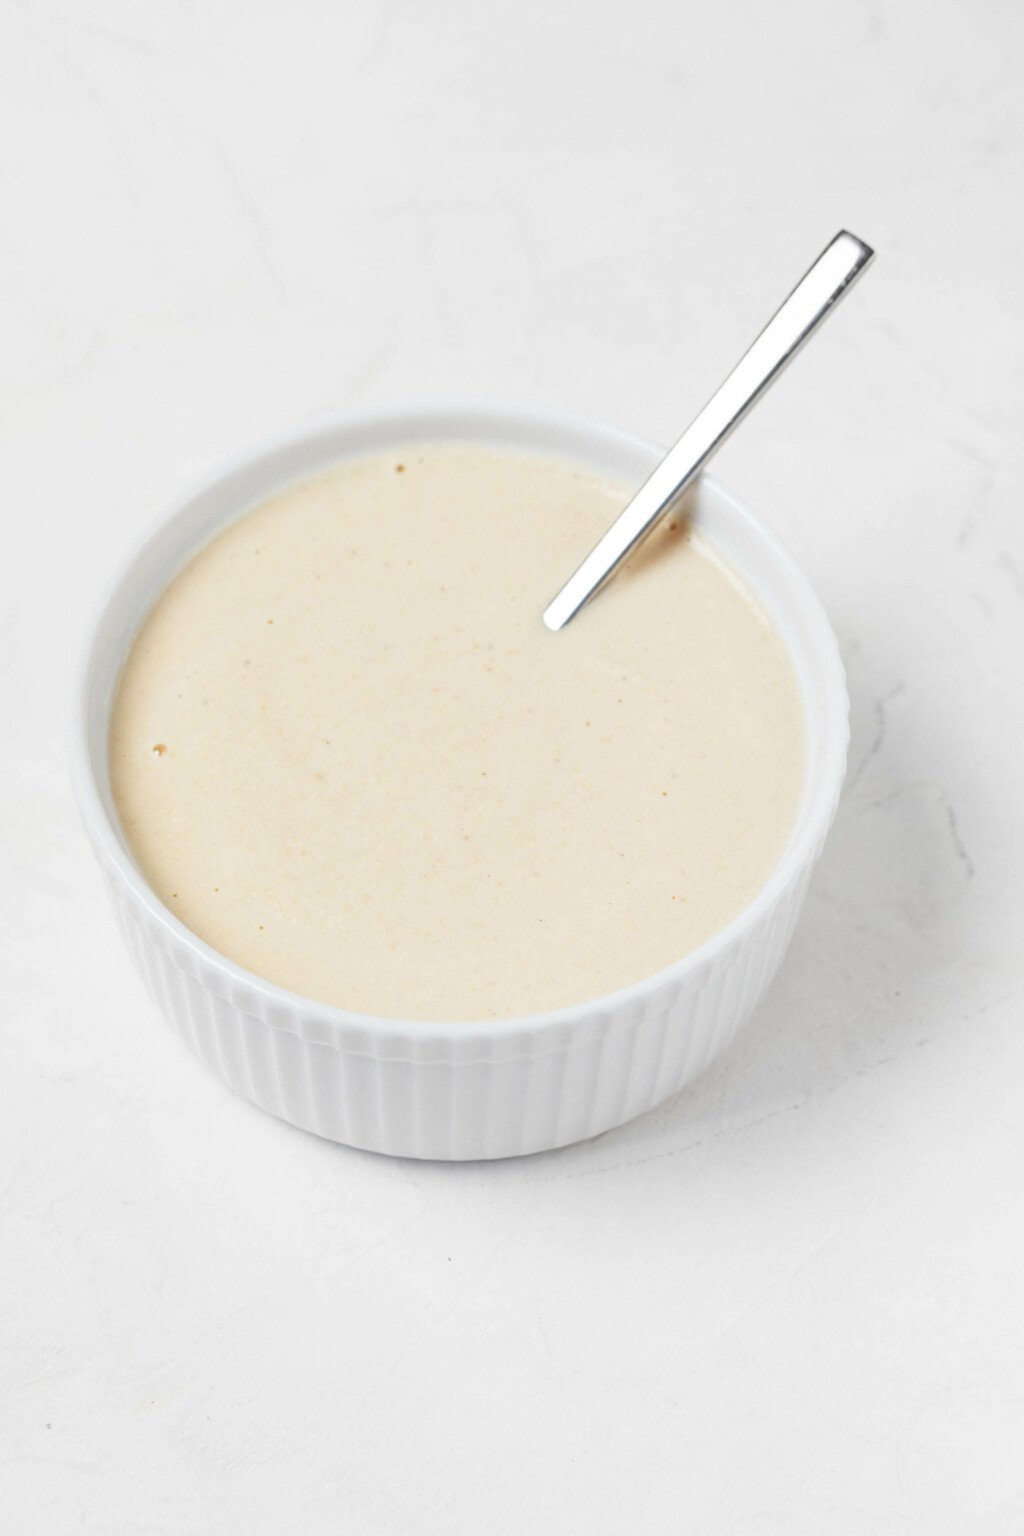 A round, white ramekin is filled with a vegan cashew whipped cream.